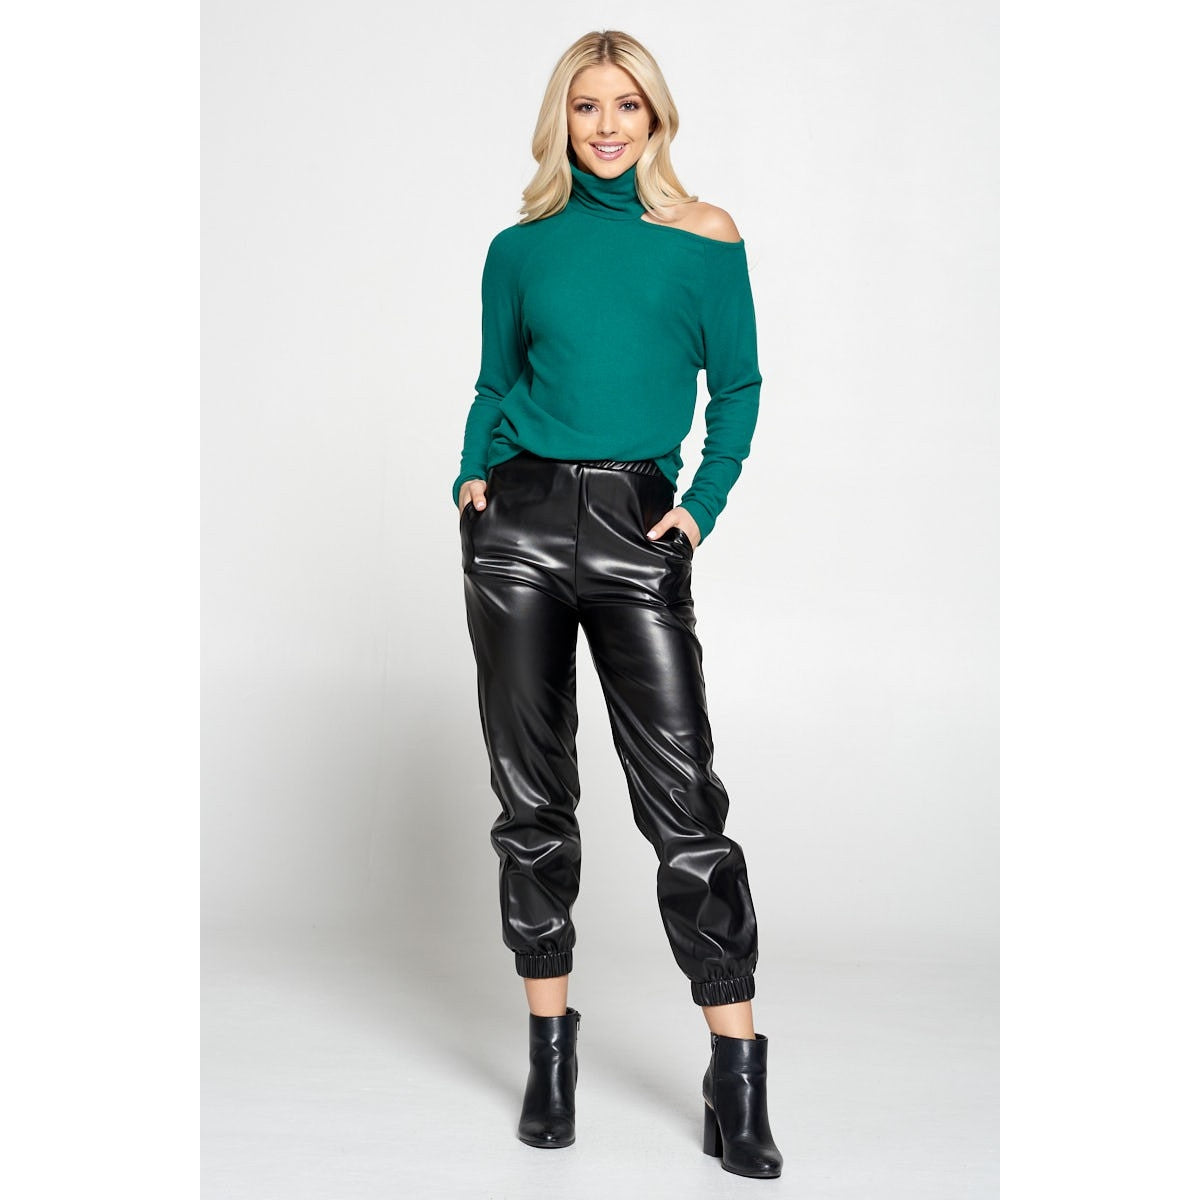 Blonde woman with long hair wearing faux black leather pants with a green cold shoulder turtleneck sweater 